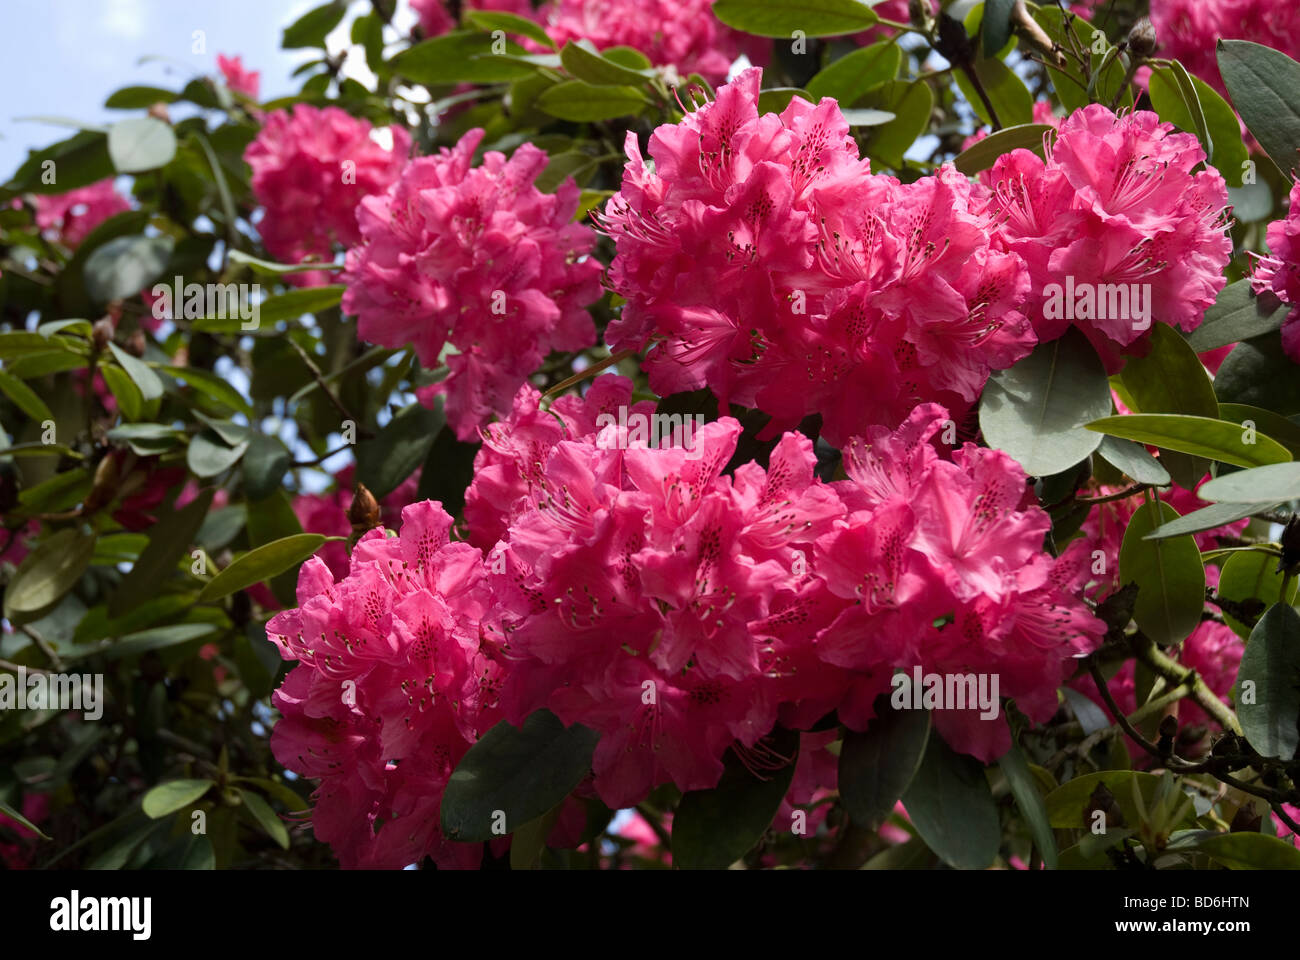 Rhododendron Cynthia Pence Ericaceae pink flowers London UK Stock Photo